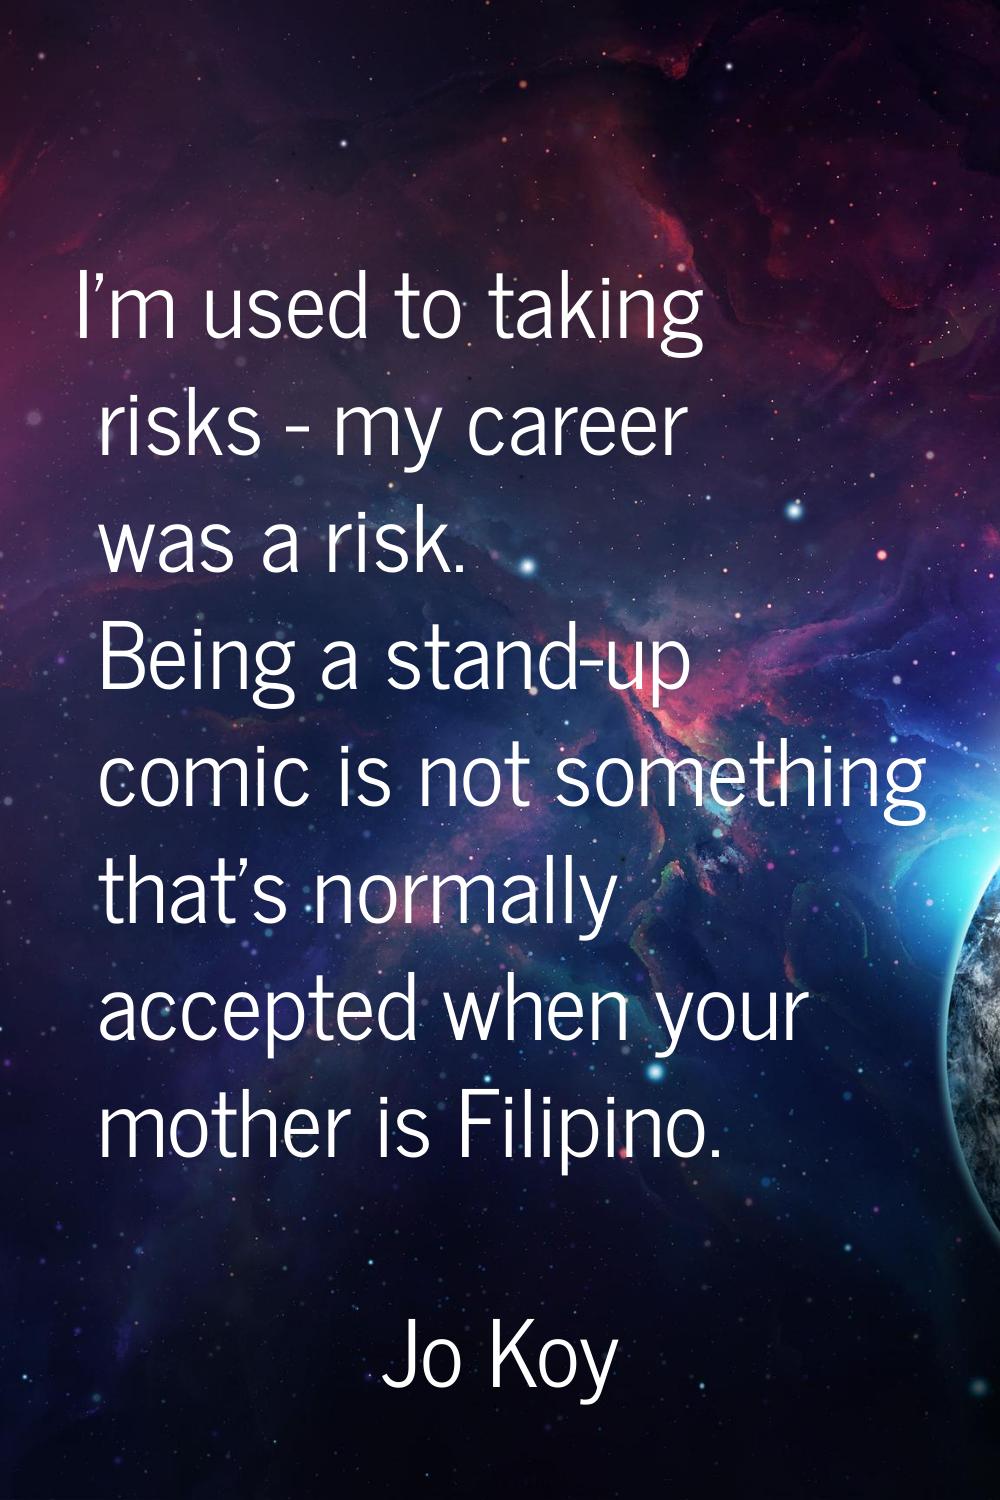 I'm used to taking risks - my career was a risk. Being a stand-up comic is not something that's nor